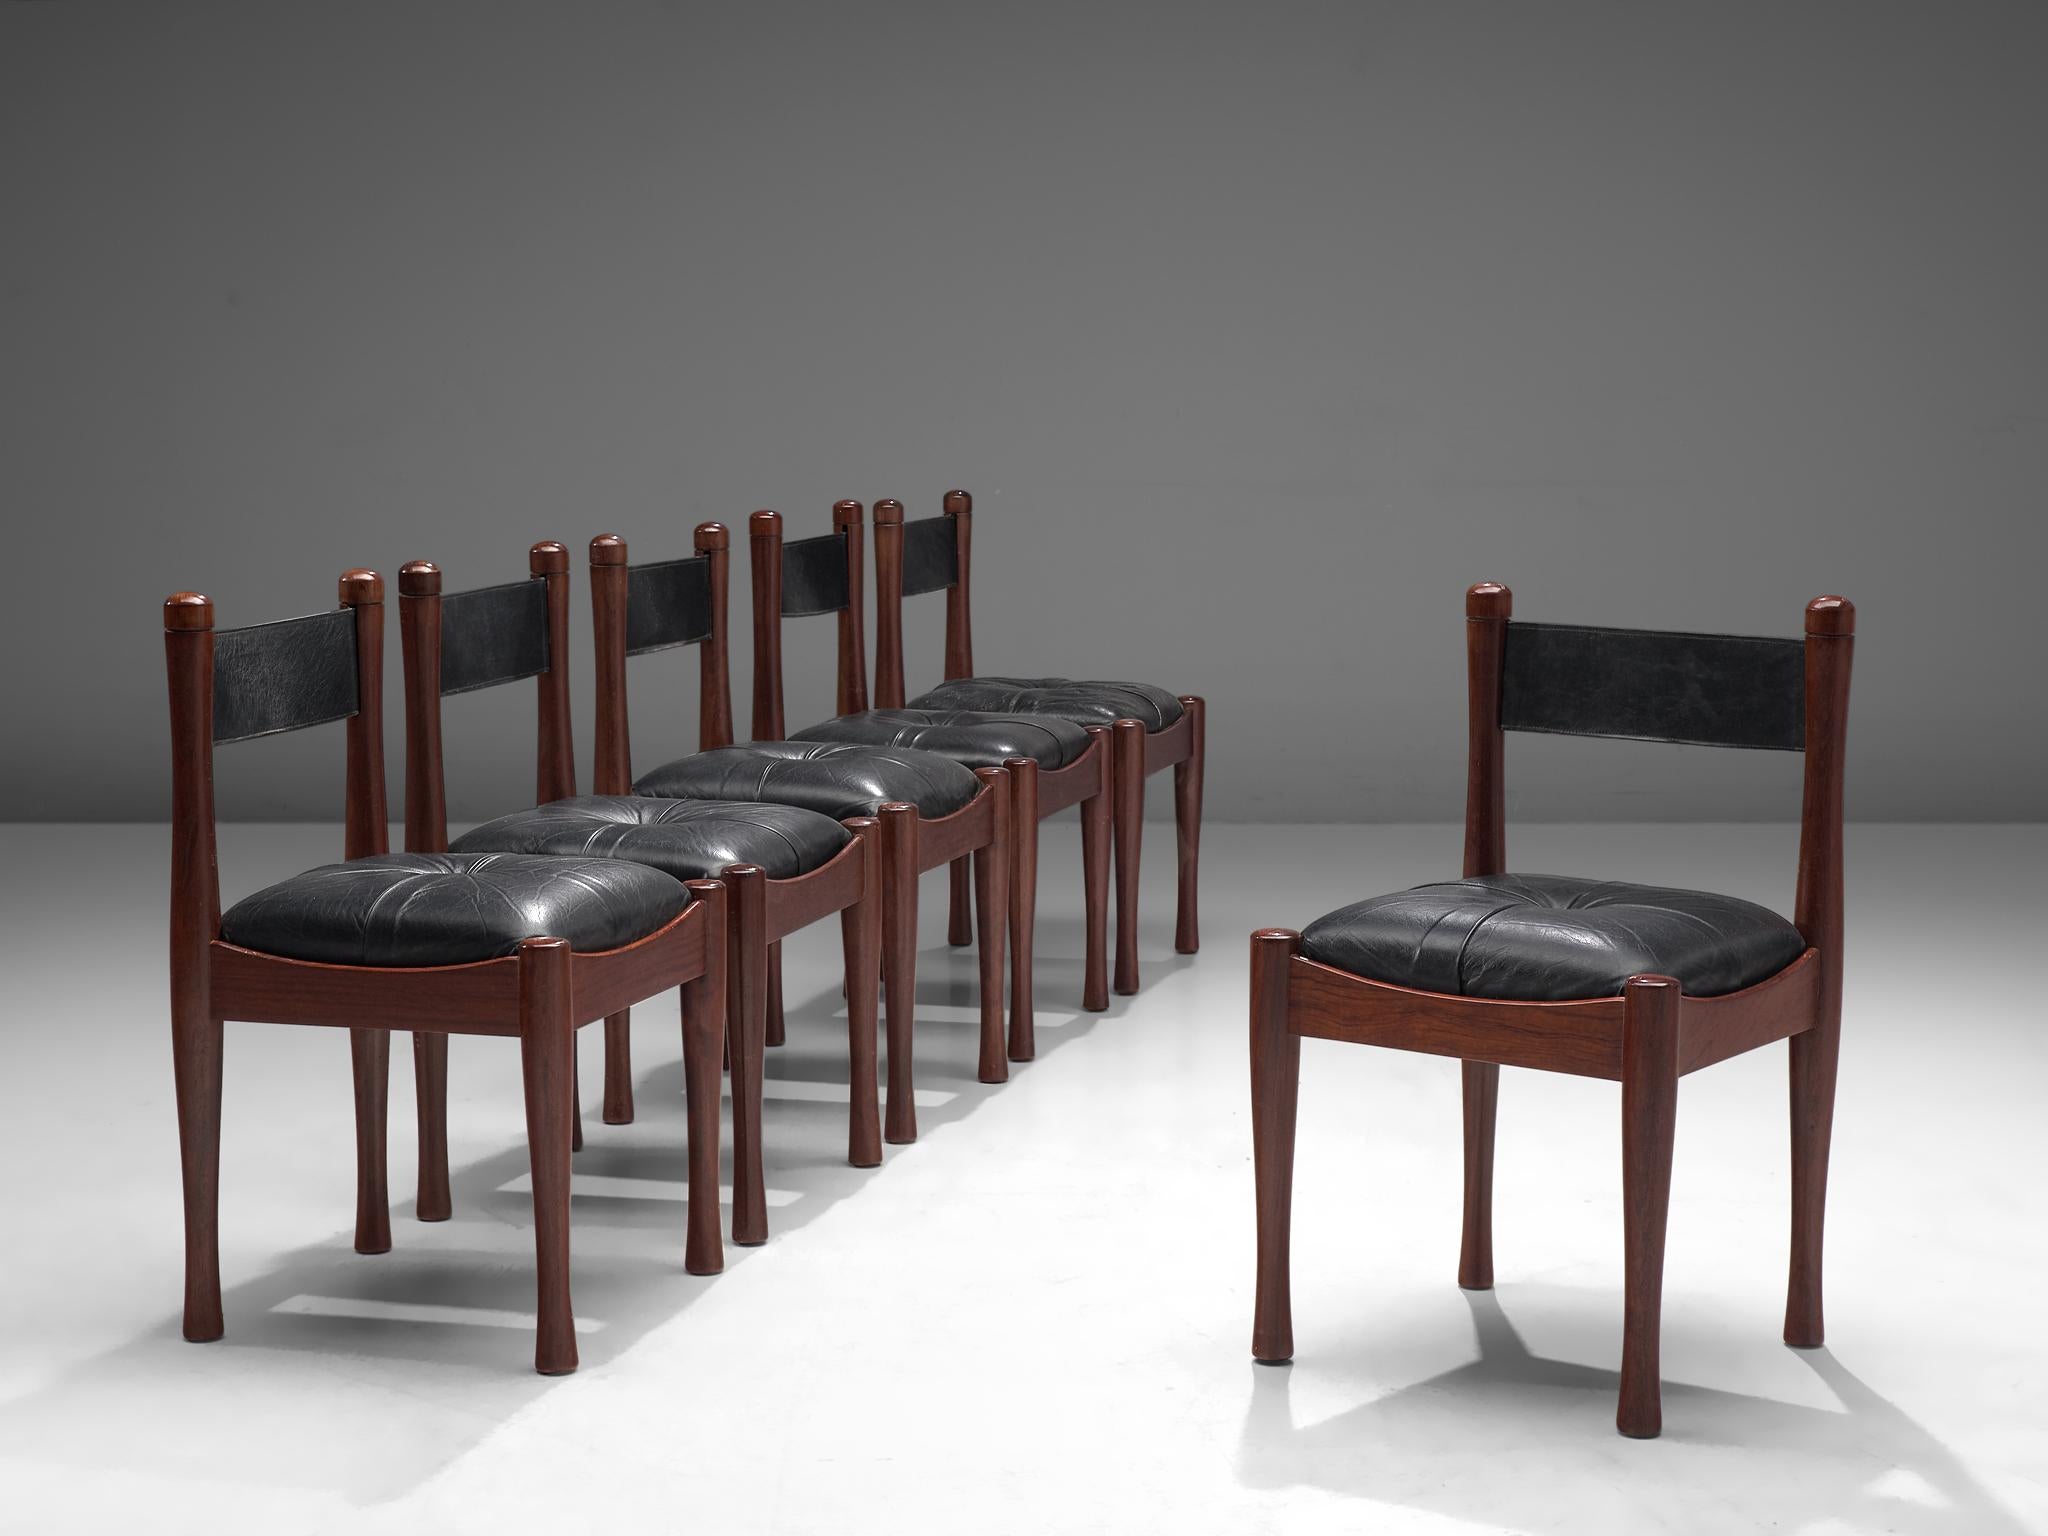 Silvio Coppola for Bernini, set of 6 dining chairs, beech and black leather, Italy, 1960s

The chairs feature a sturdy darkened beech wood frame and black leather seats. The backrest is also made of leather. The seat is tufted and filled richly for